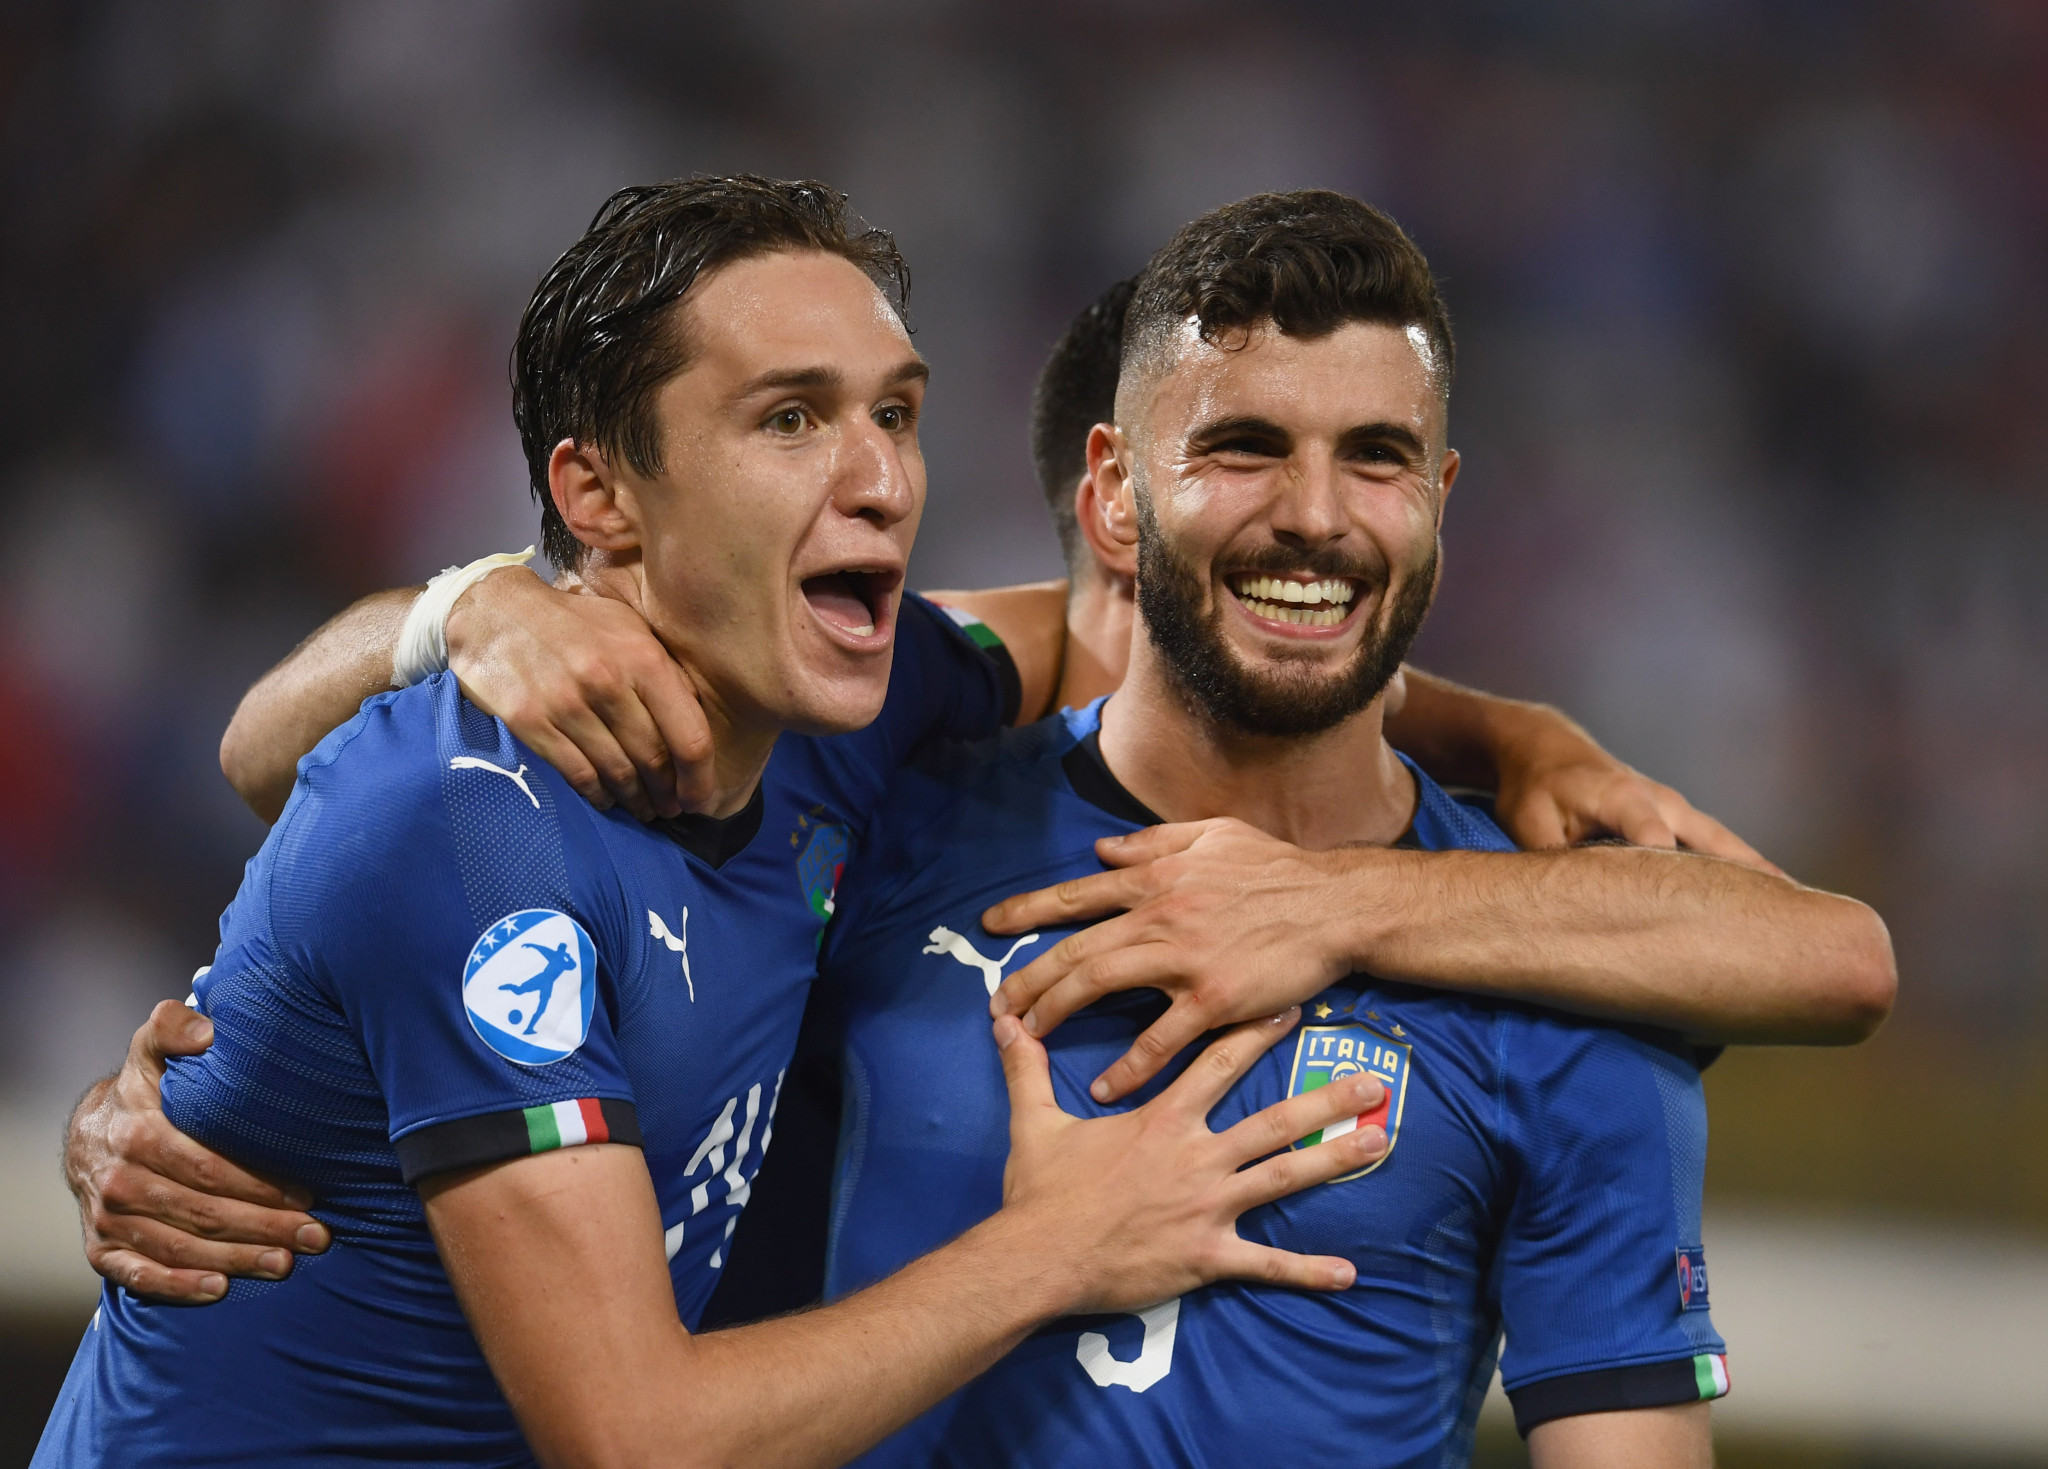 Italy overcome early setback to open European Under-21 Championship campaign with victory over Spain